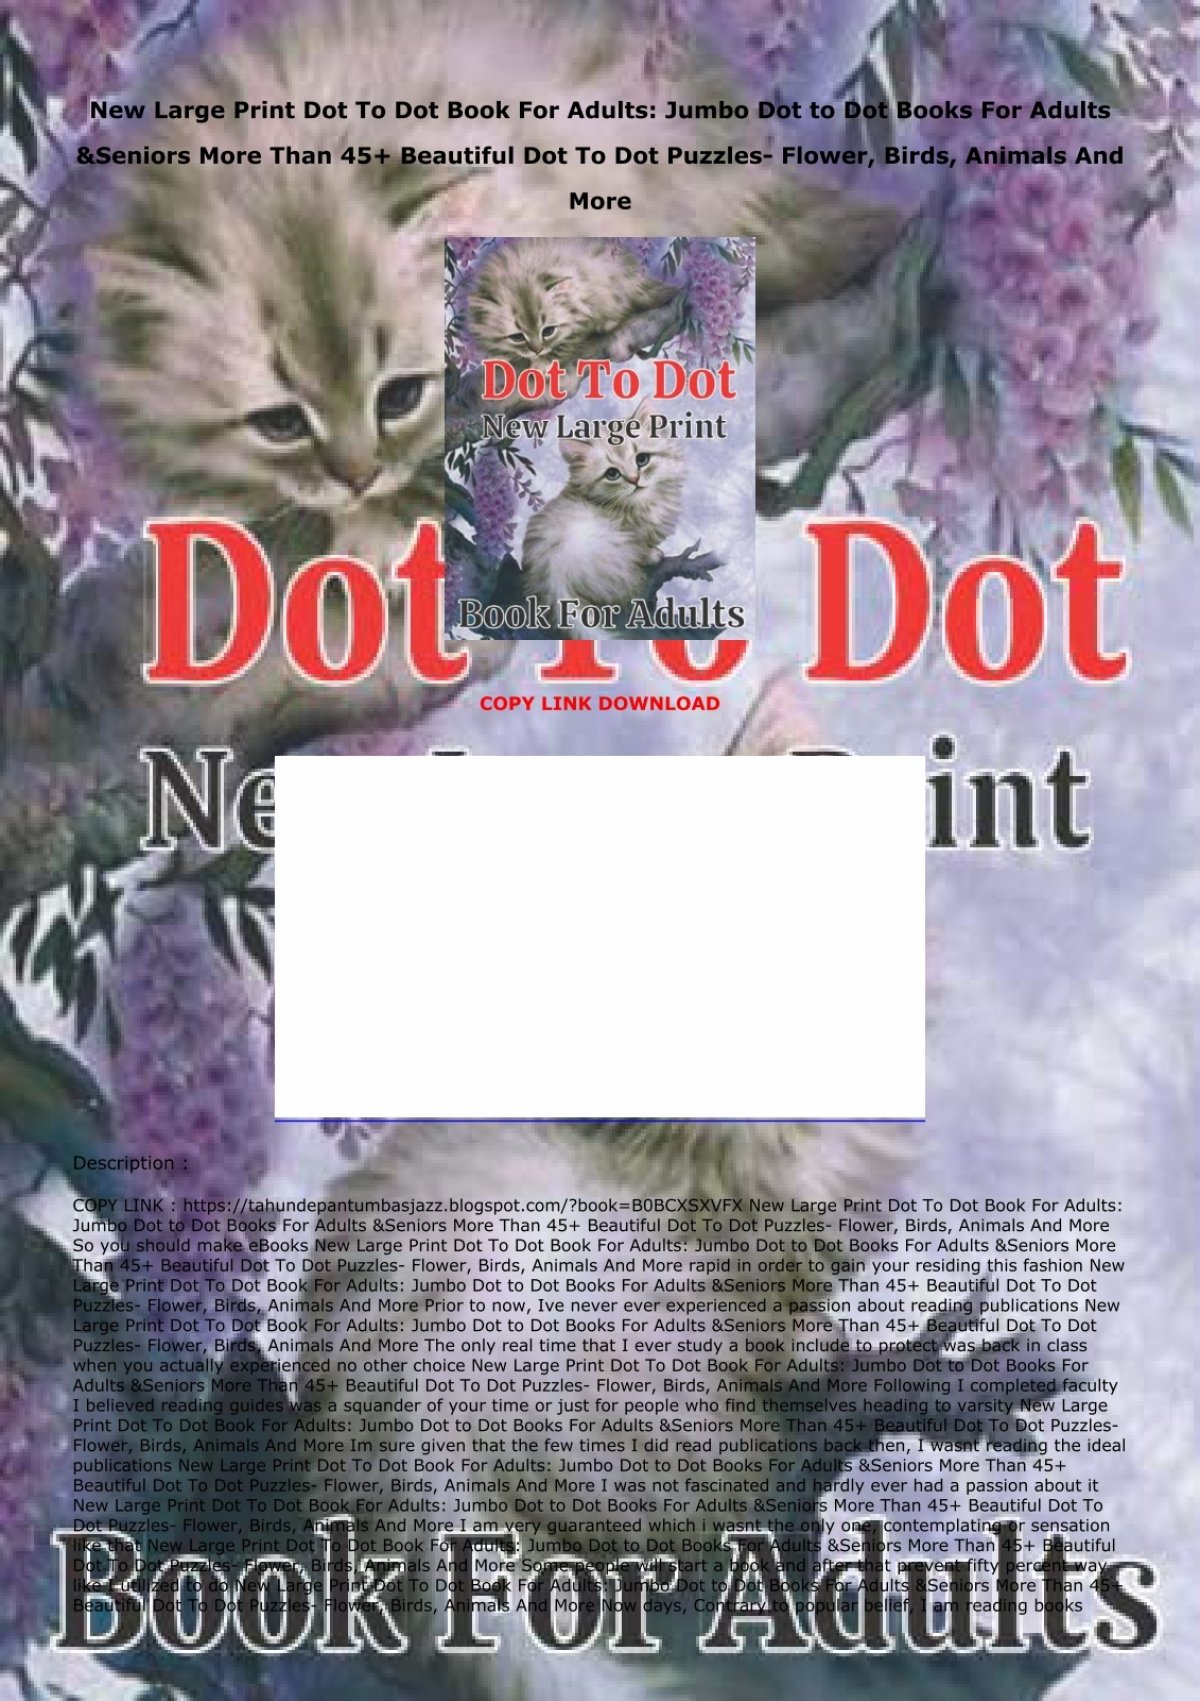 new-large-print-dot-to-dot-book-for-adults-jumbo-dot-to-dot-books-for-adults-seniors-more-than